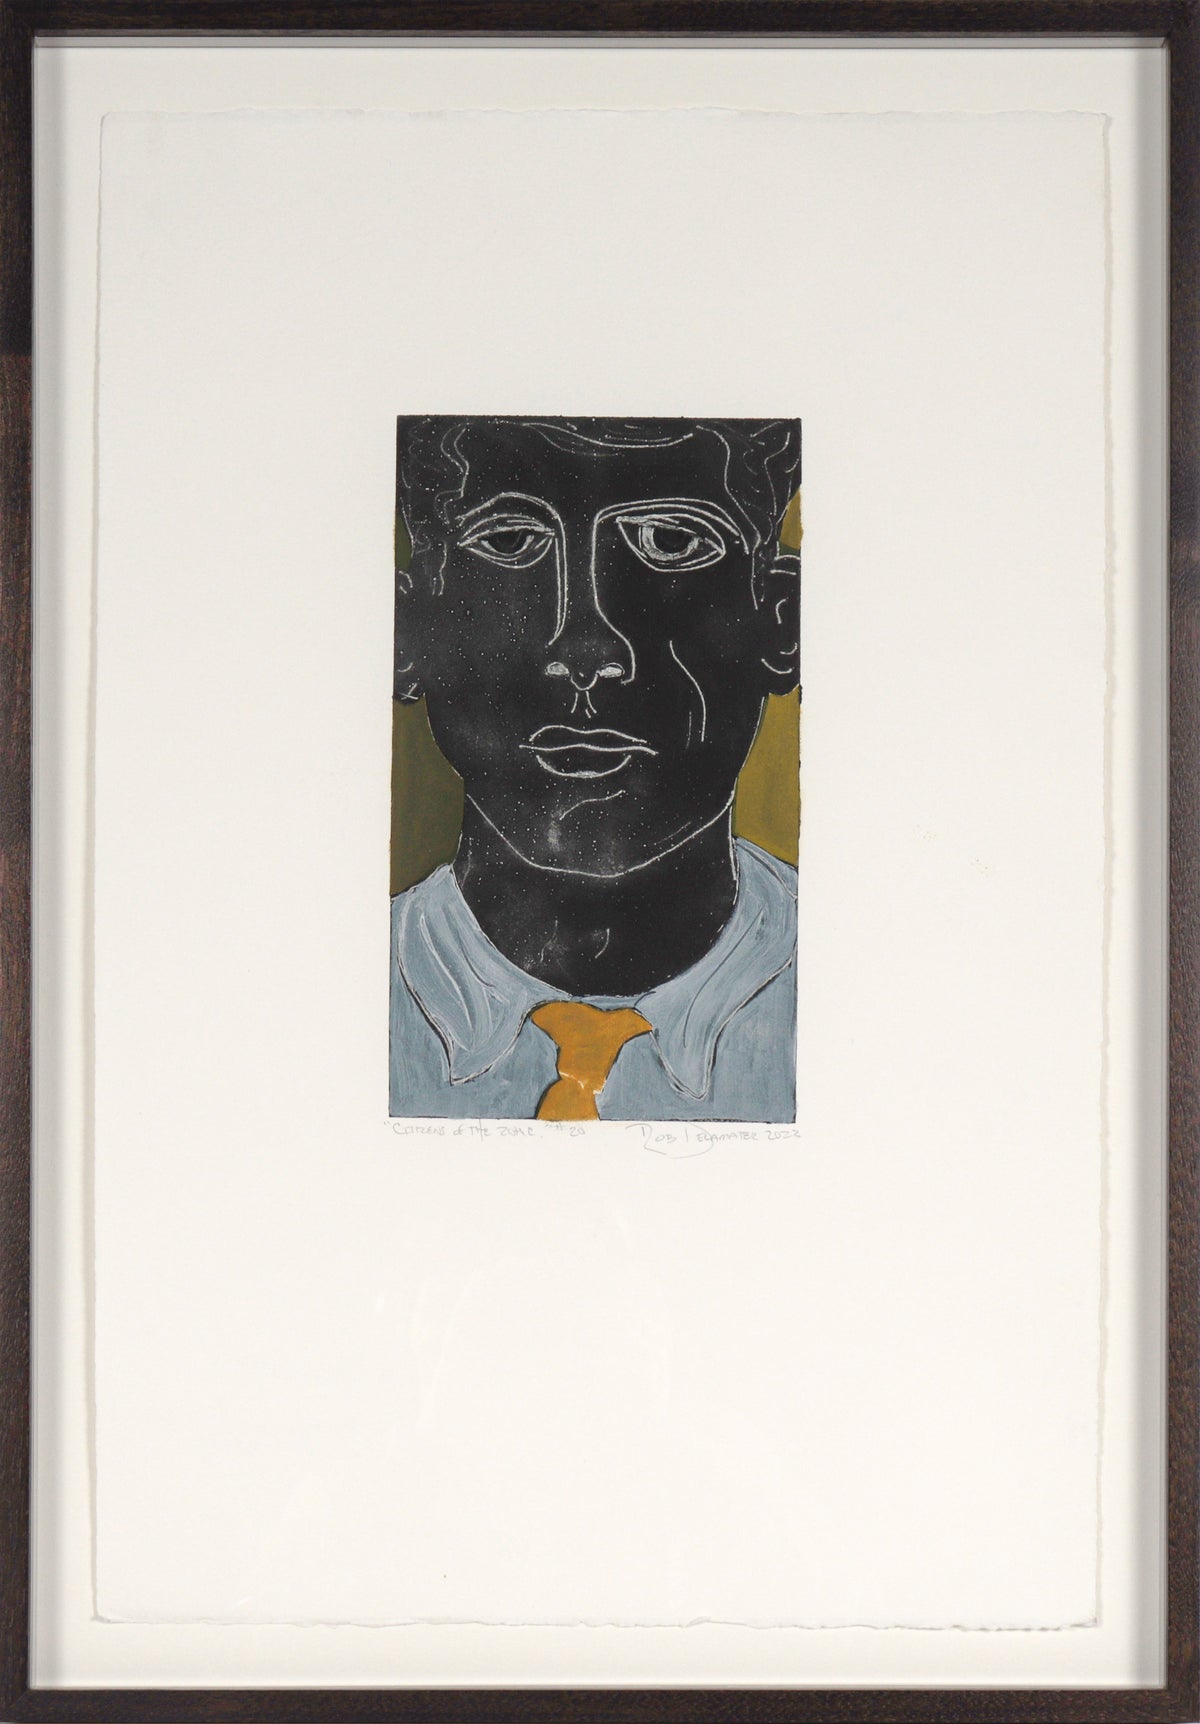 &lt;i&gt;Citizens of the 20th Century #21 (Circus Worker)&lt;/i&gt; &lt;br&gt;2023 Monotype &lt;br&gt;&lt;br&gt;#C5393